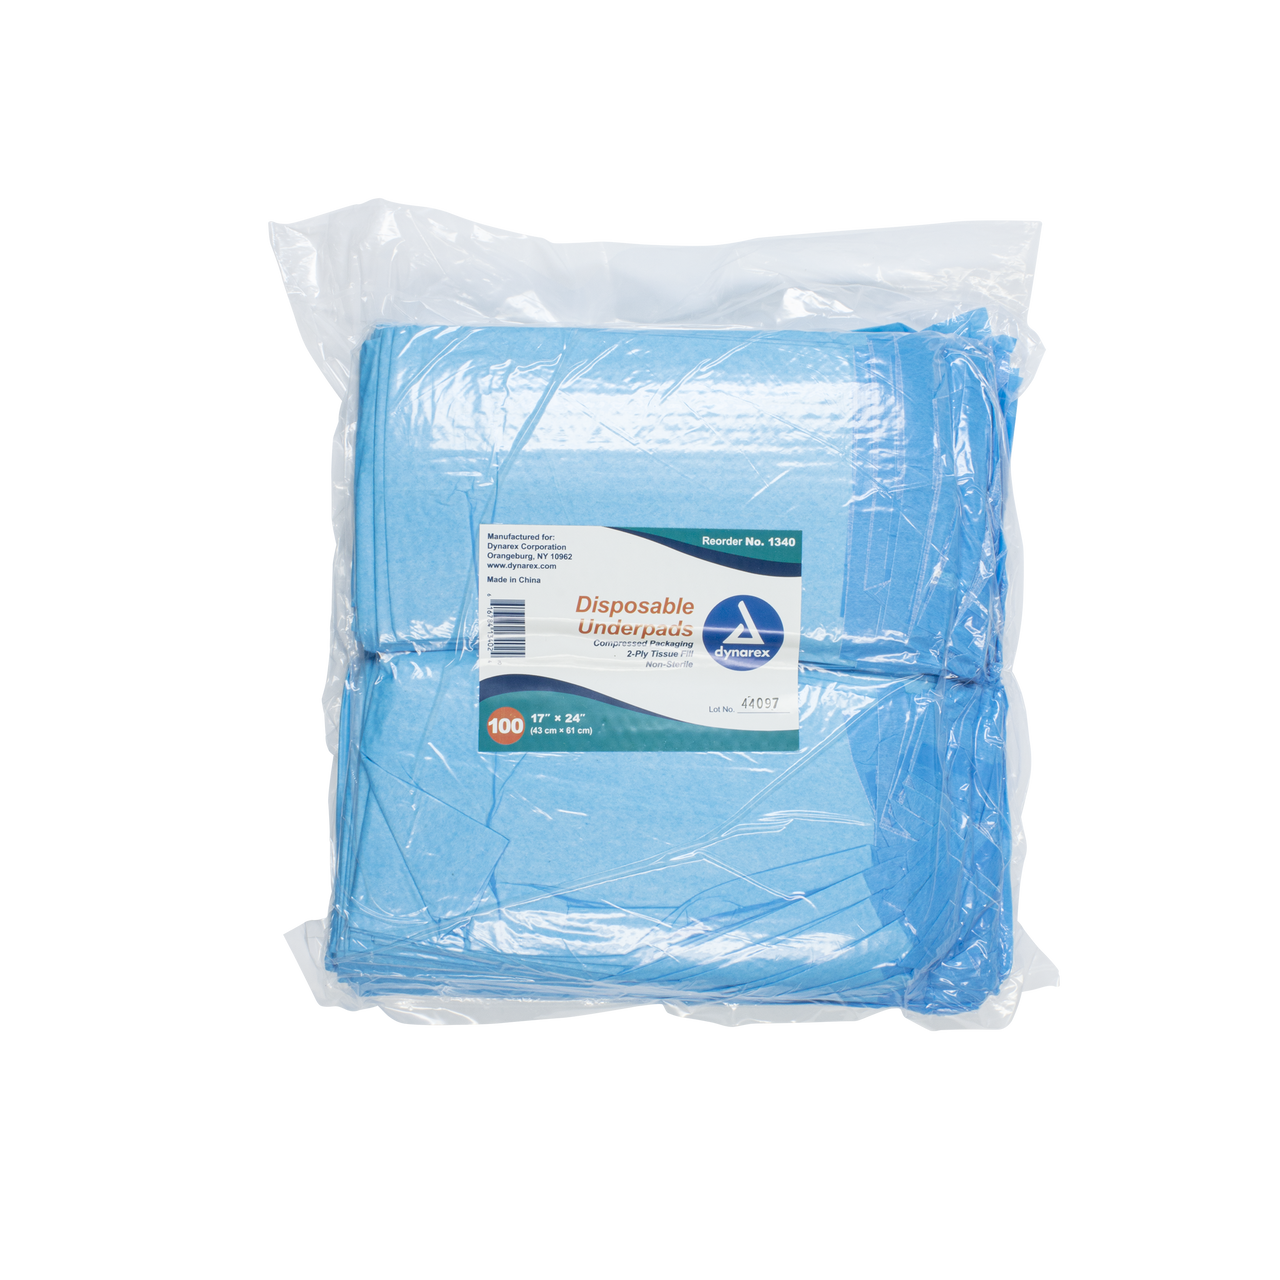 Vive Health Super Absorbent Reusable Incontinence Pads